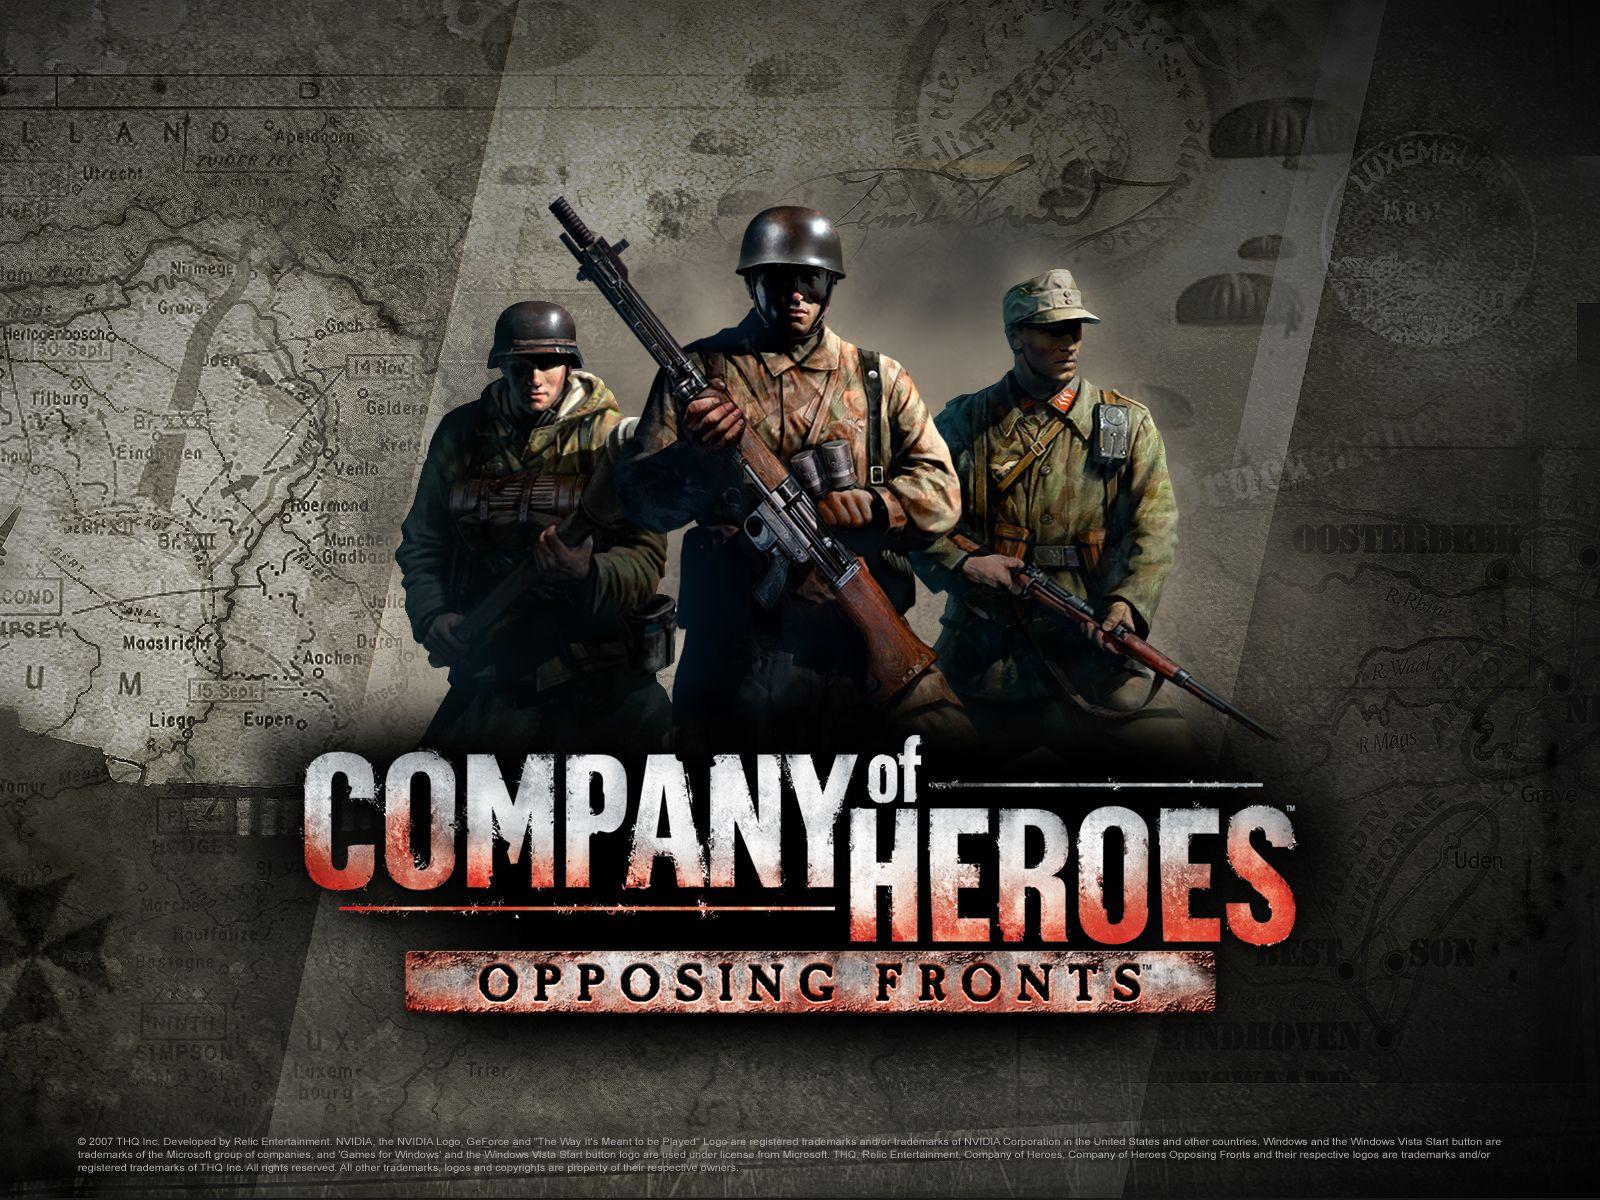 Company of Heroes Wallpapers - Top Free Company of Heroes Backgrounds ...